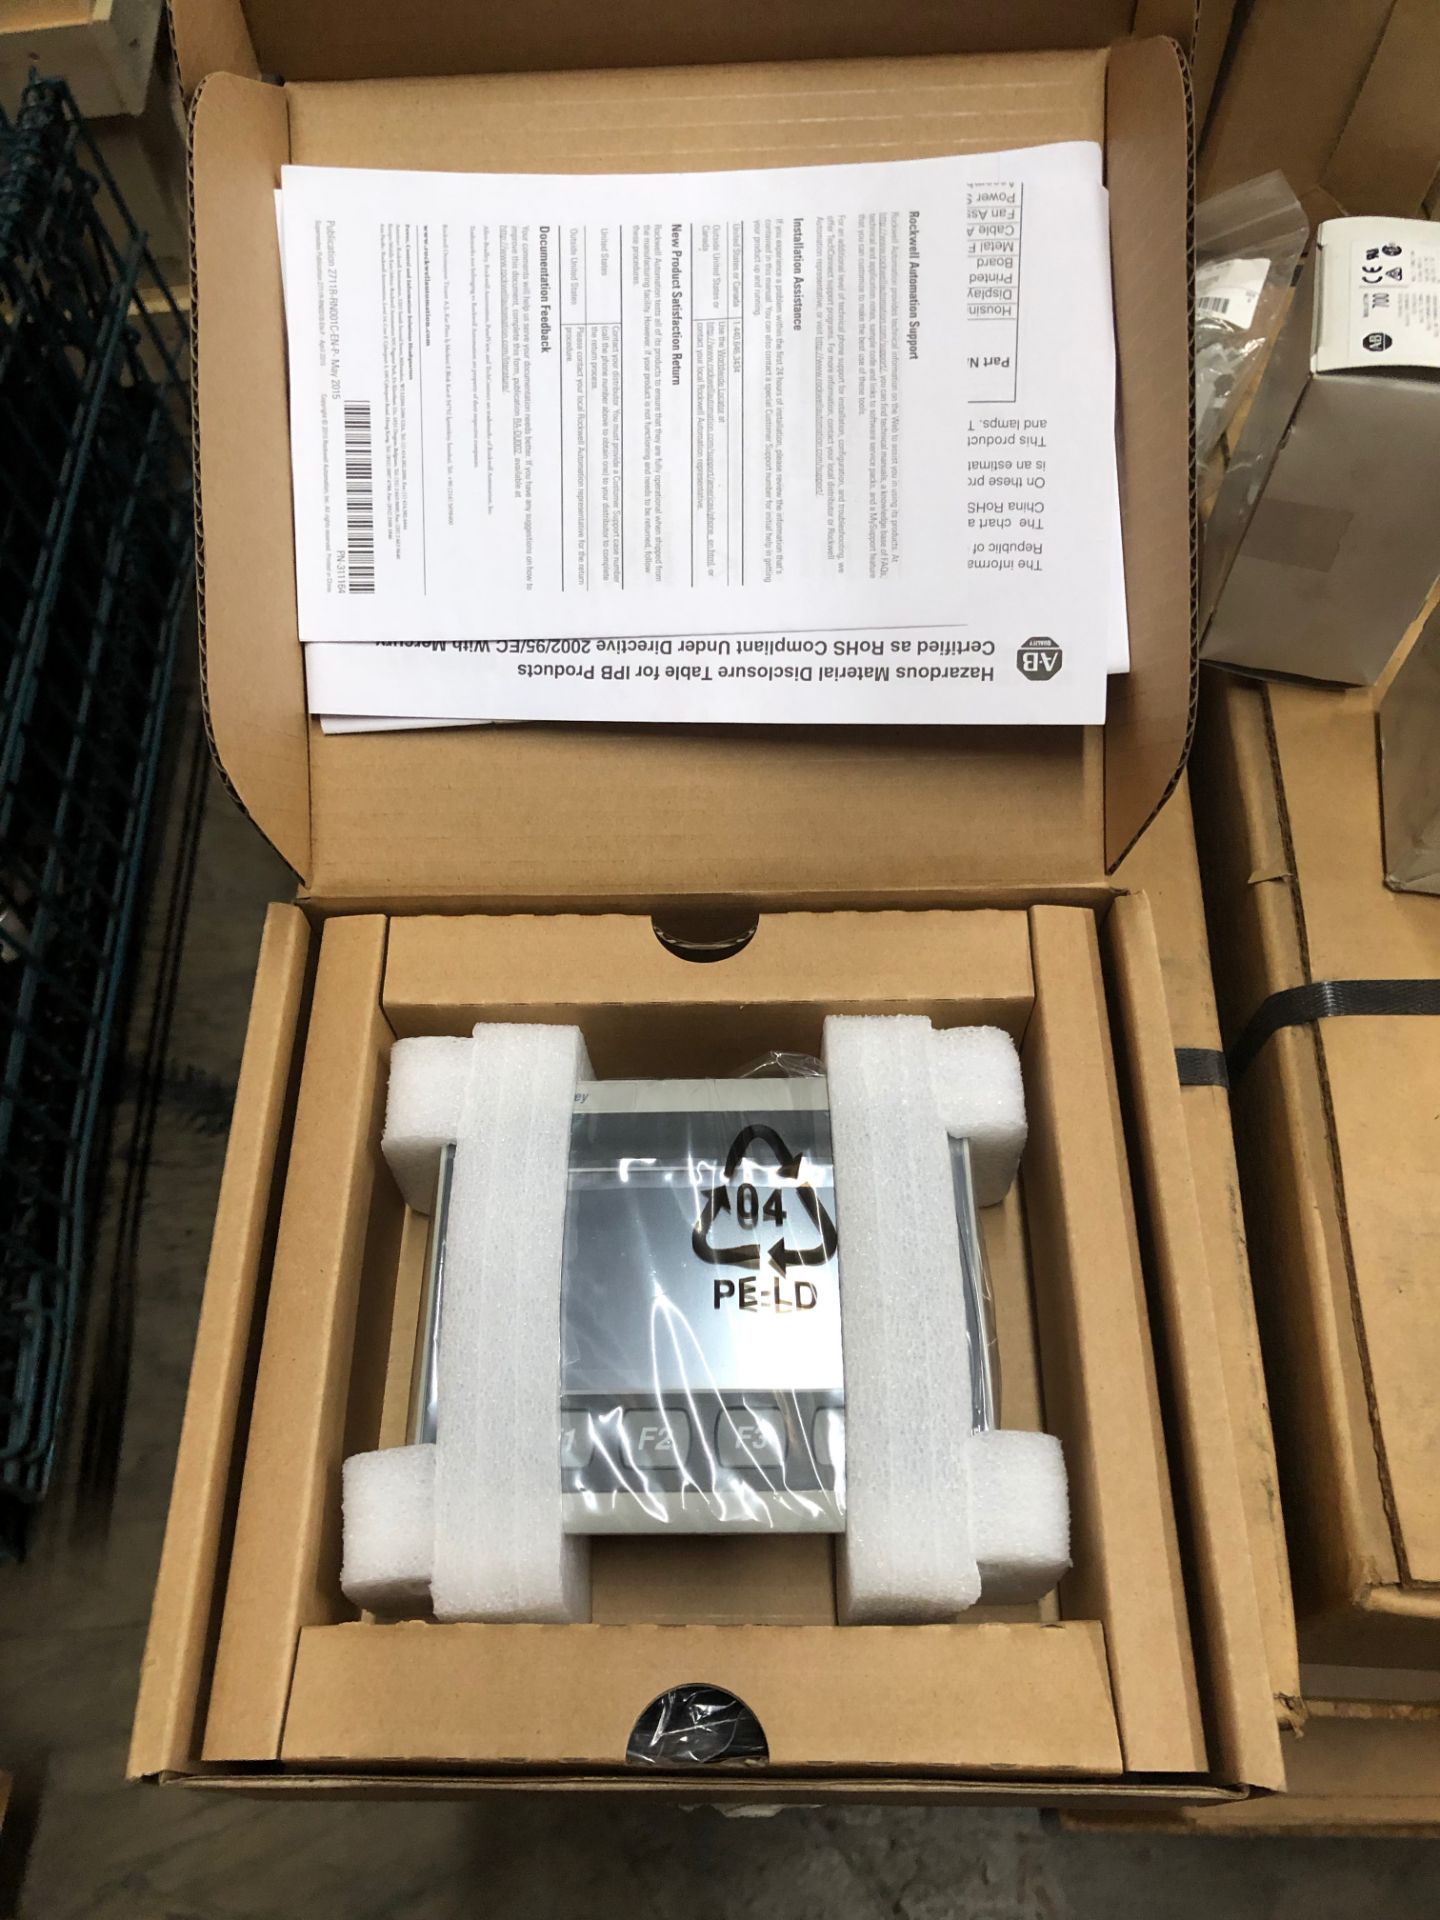 AB Allen Bradley PanelView 800 HMI Terminal Touch Screen TFT Cat # 2711R-T4T - new, never used - - Image 2 of 2